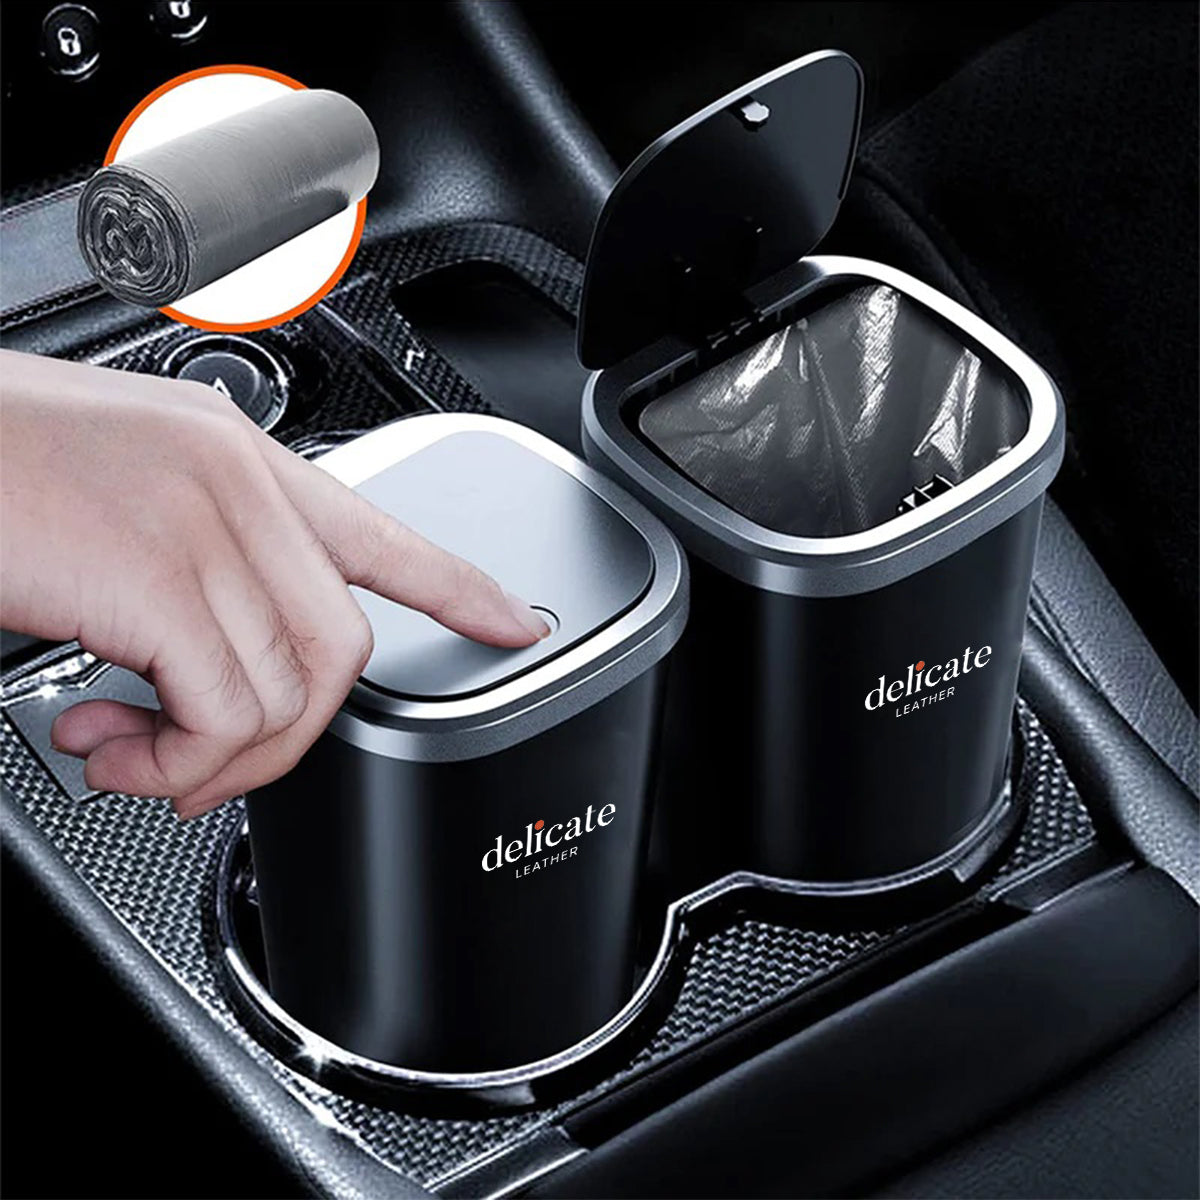 Car Trash Cans, Custom For Your Cars, Compact & Durable Car Accessories for Interior Use 2 Pack, Practical Car Organizers and Storage Cups with Pop-Up Open, Car Accessories PE11993 - Delicate Leather